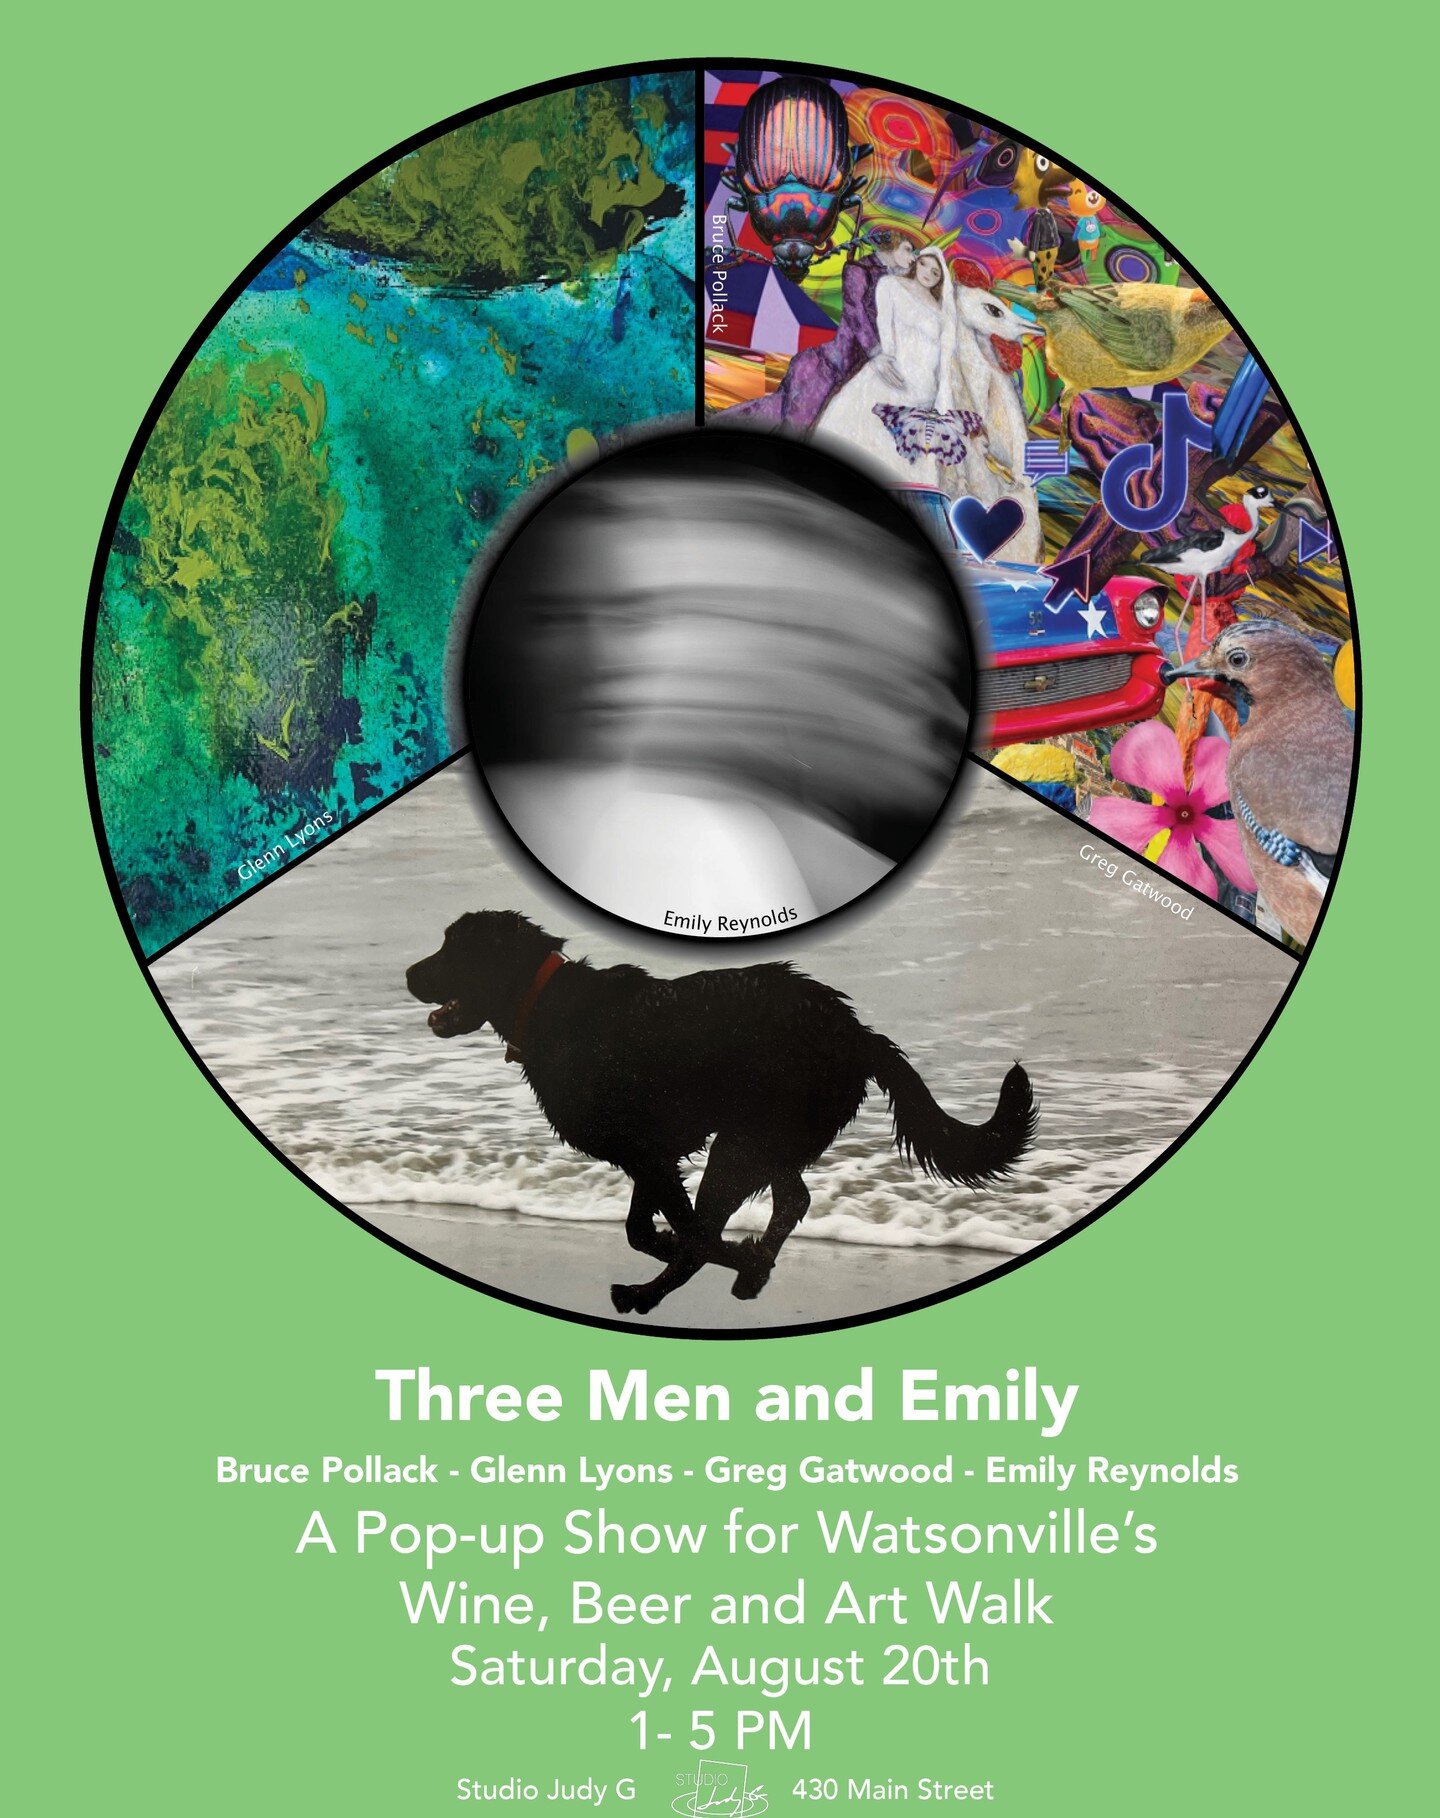 @Studiojudyg is hosting @integrity.wine for Watsonville's Wine, Beer and Art Walk this Saturday 1 - 5 PM!!! We will also be hosting four new artists for a pop up exhibition, Three Men and Emily: artists Emily Reynolds, Bruce Pollack, Greg Gatwood, an